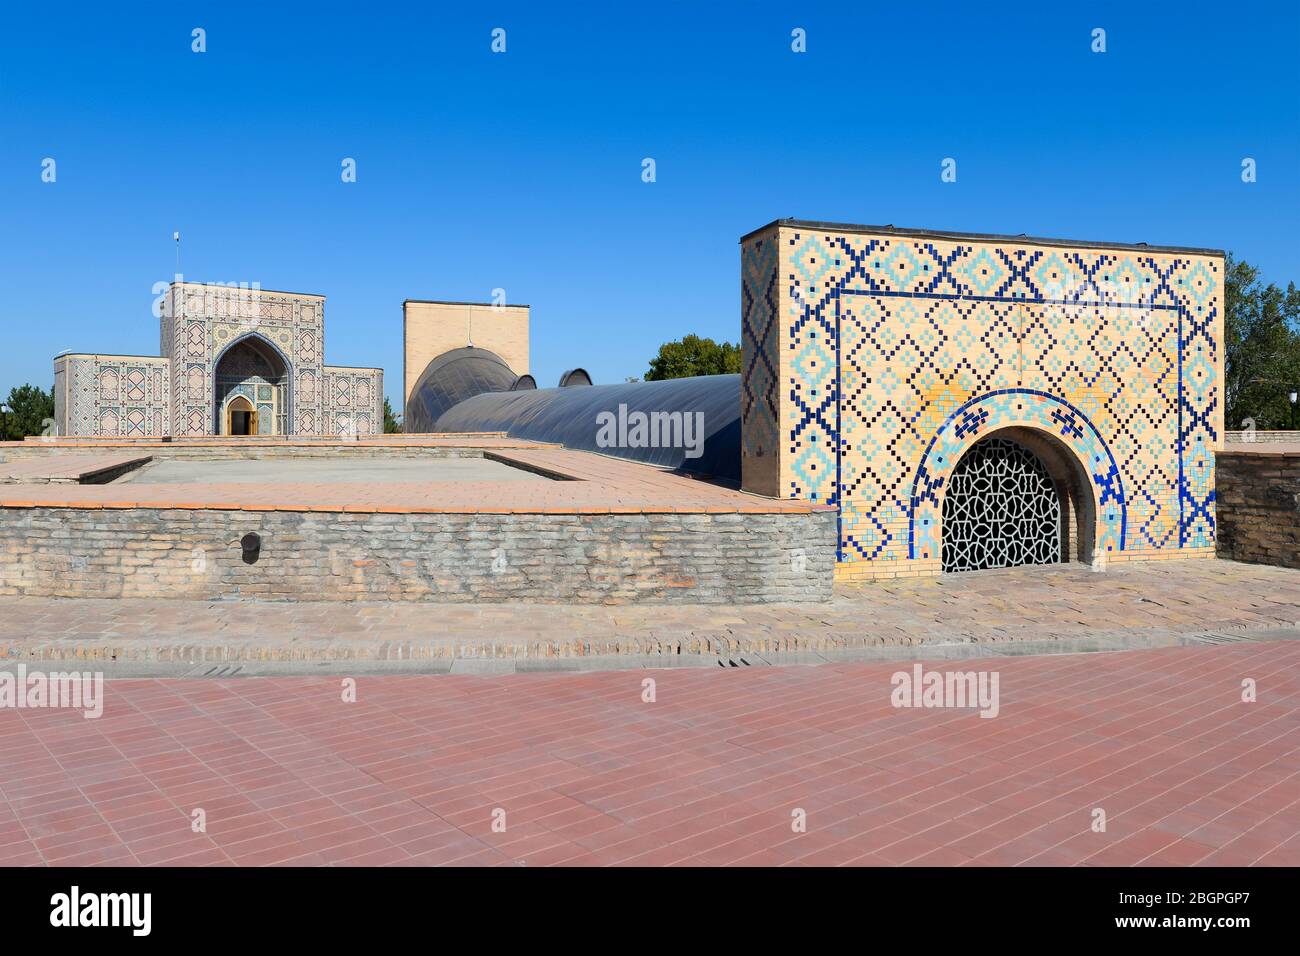 Exterior view of Ulugh Beg Astronomical Observatory in Samarkand, Uzbeksitan. Built in the 1420s by the islamic Timurid astronomer Ulugh Beg. Stock Photo